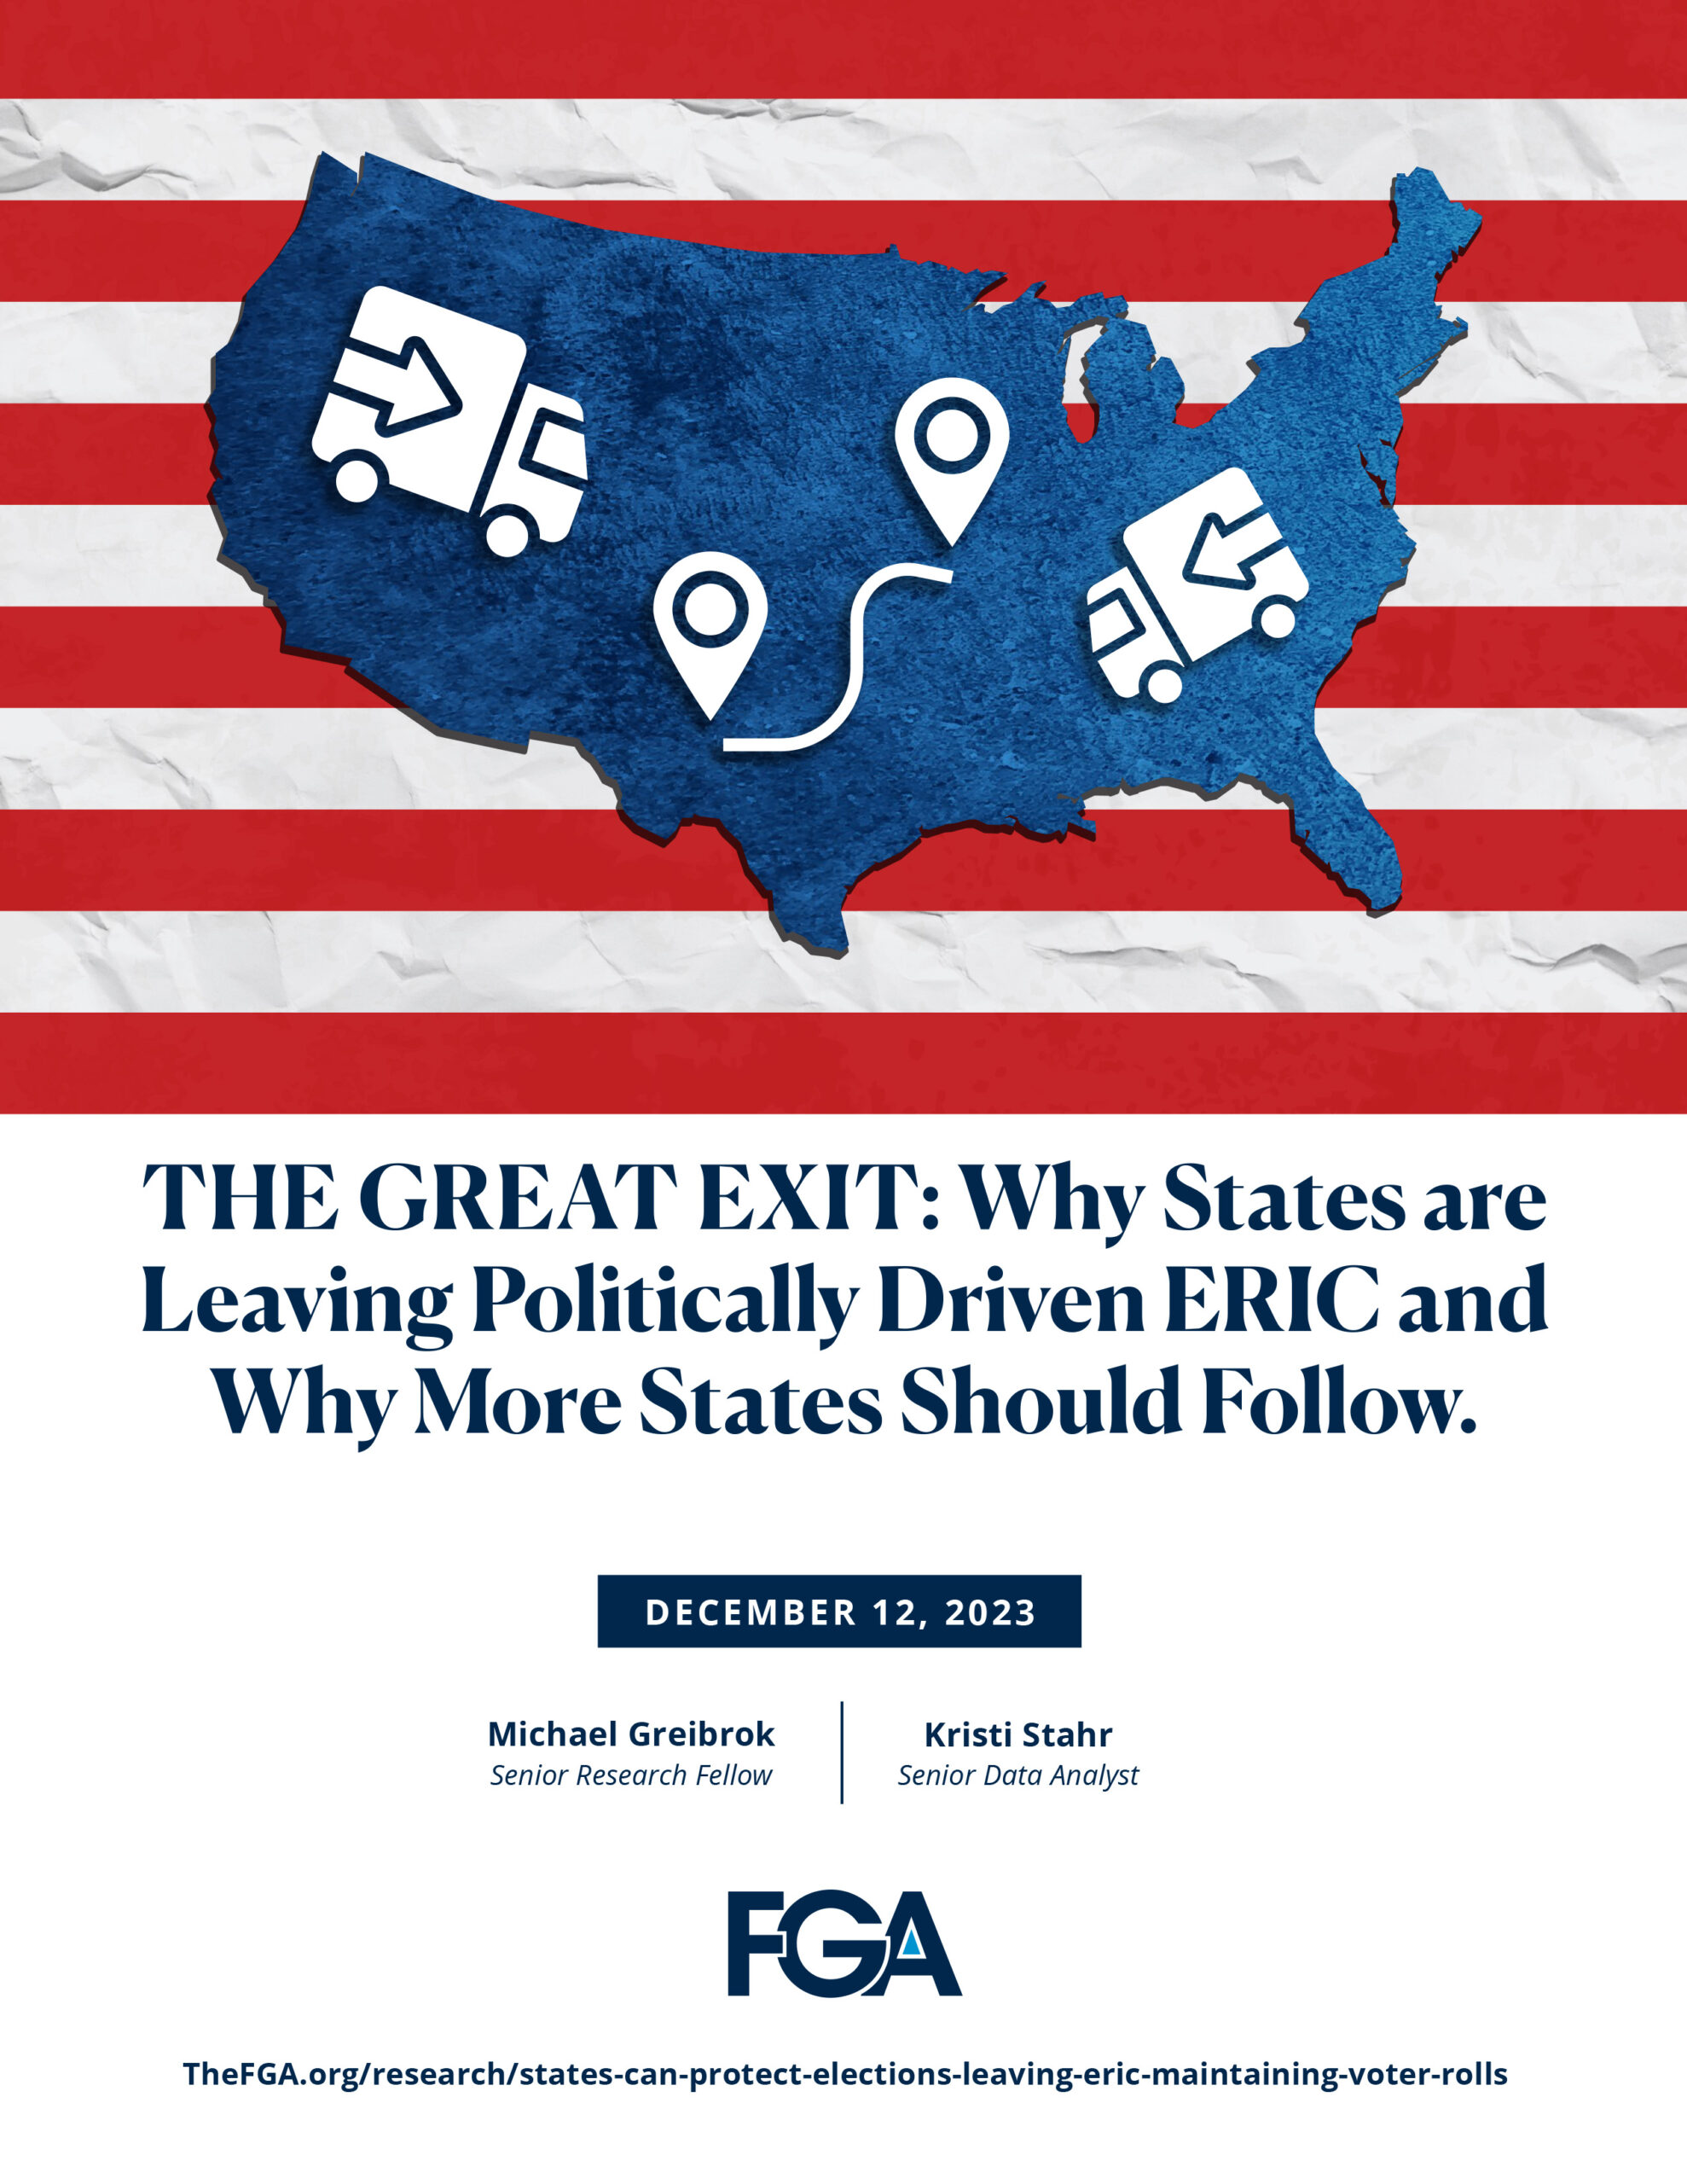 THE GREAT EXIT: Why States are Leaving Politically Driven ERIC and Why More States Should Follow.